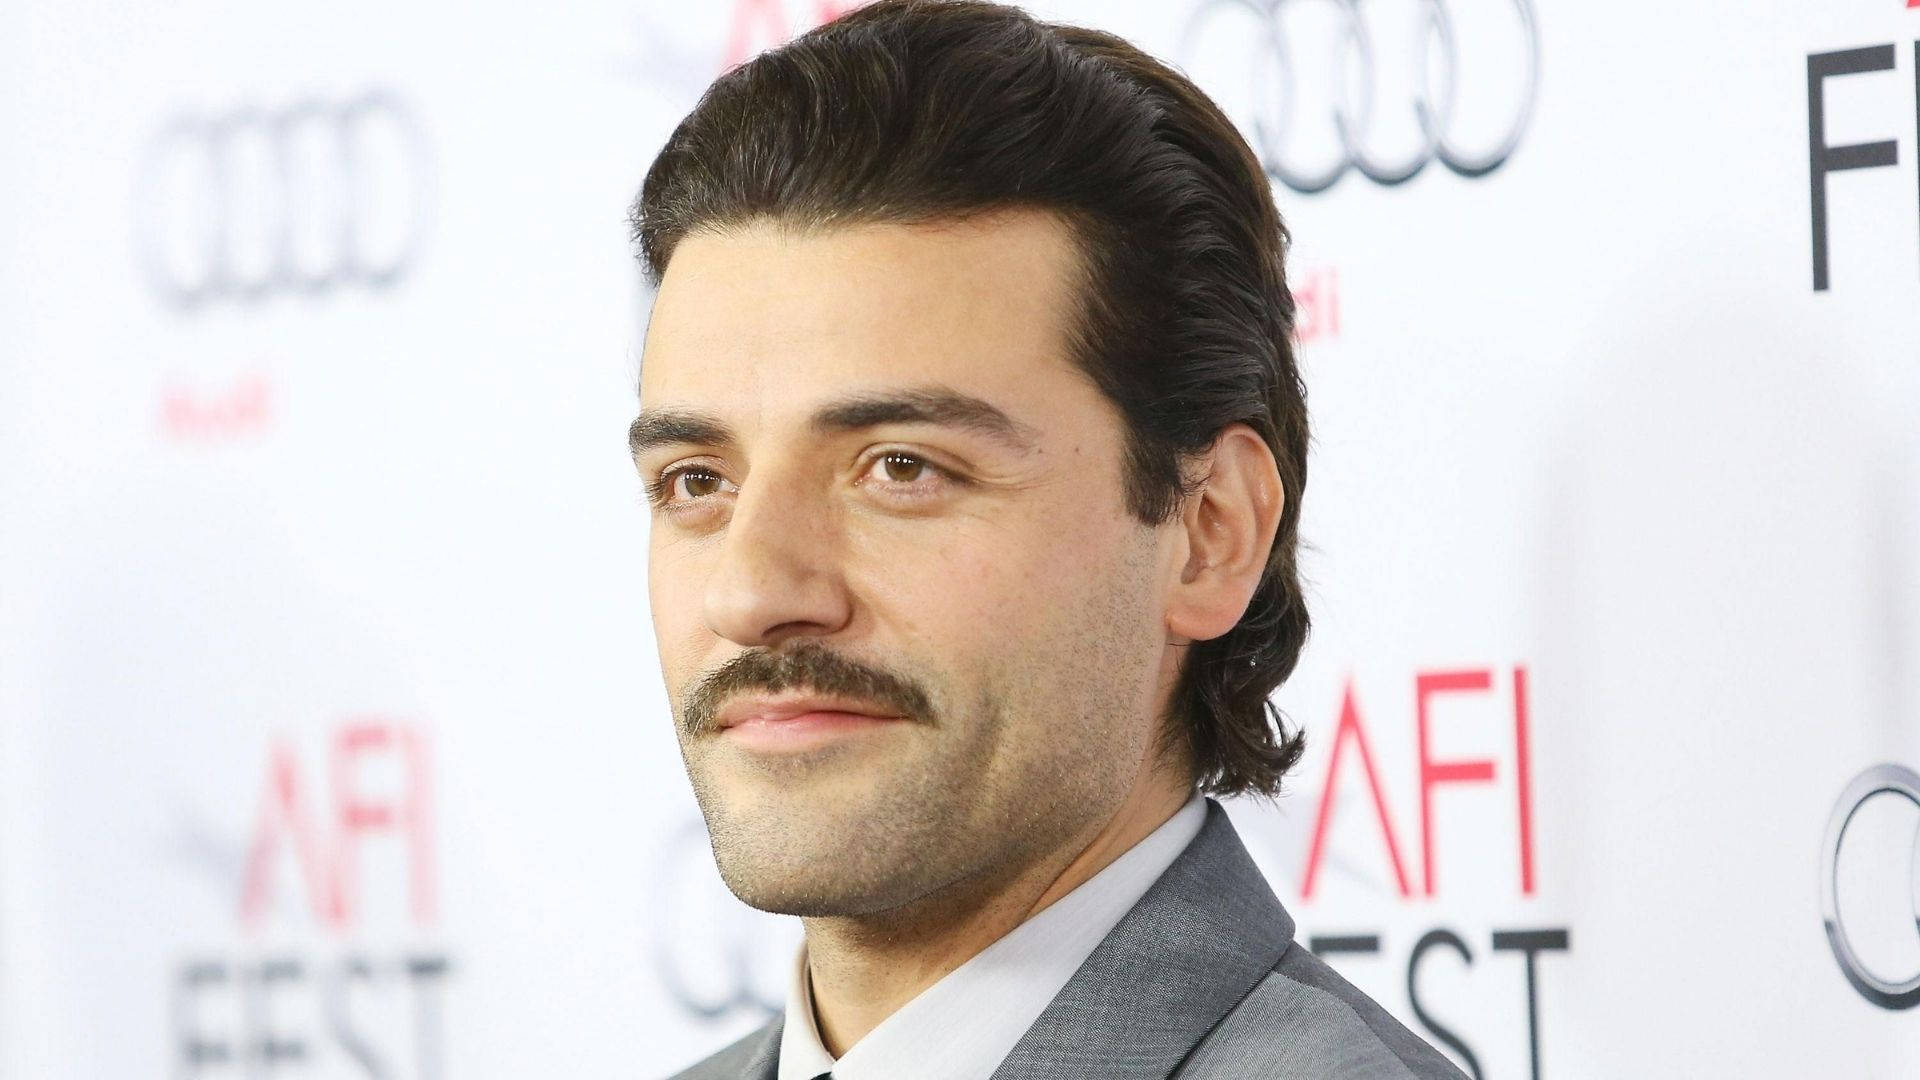 Manly Look Of Oscar Isaac Background